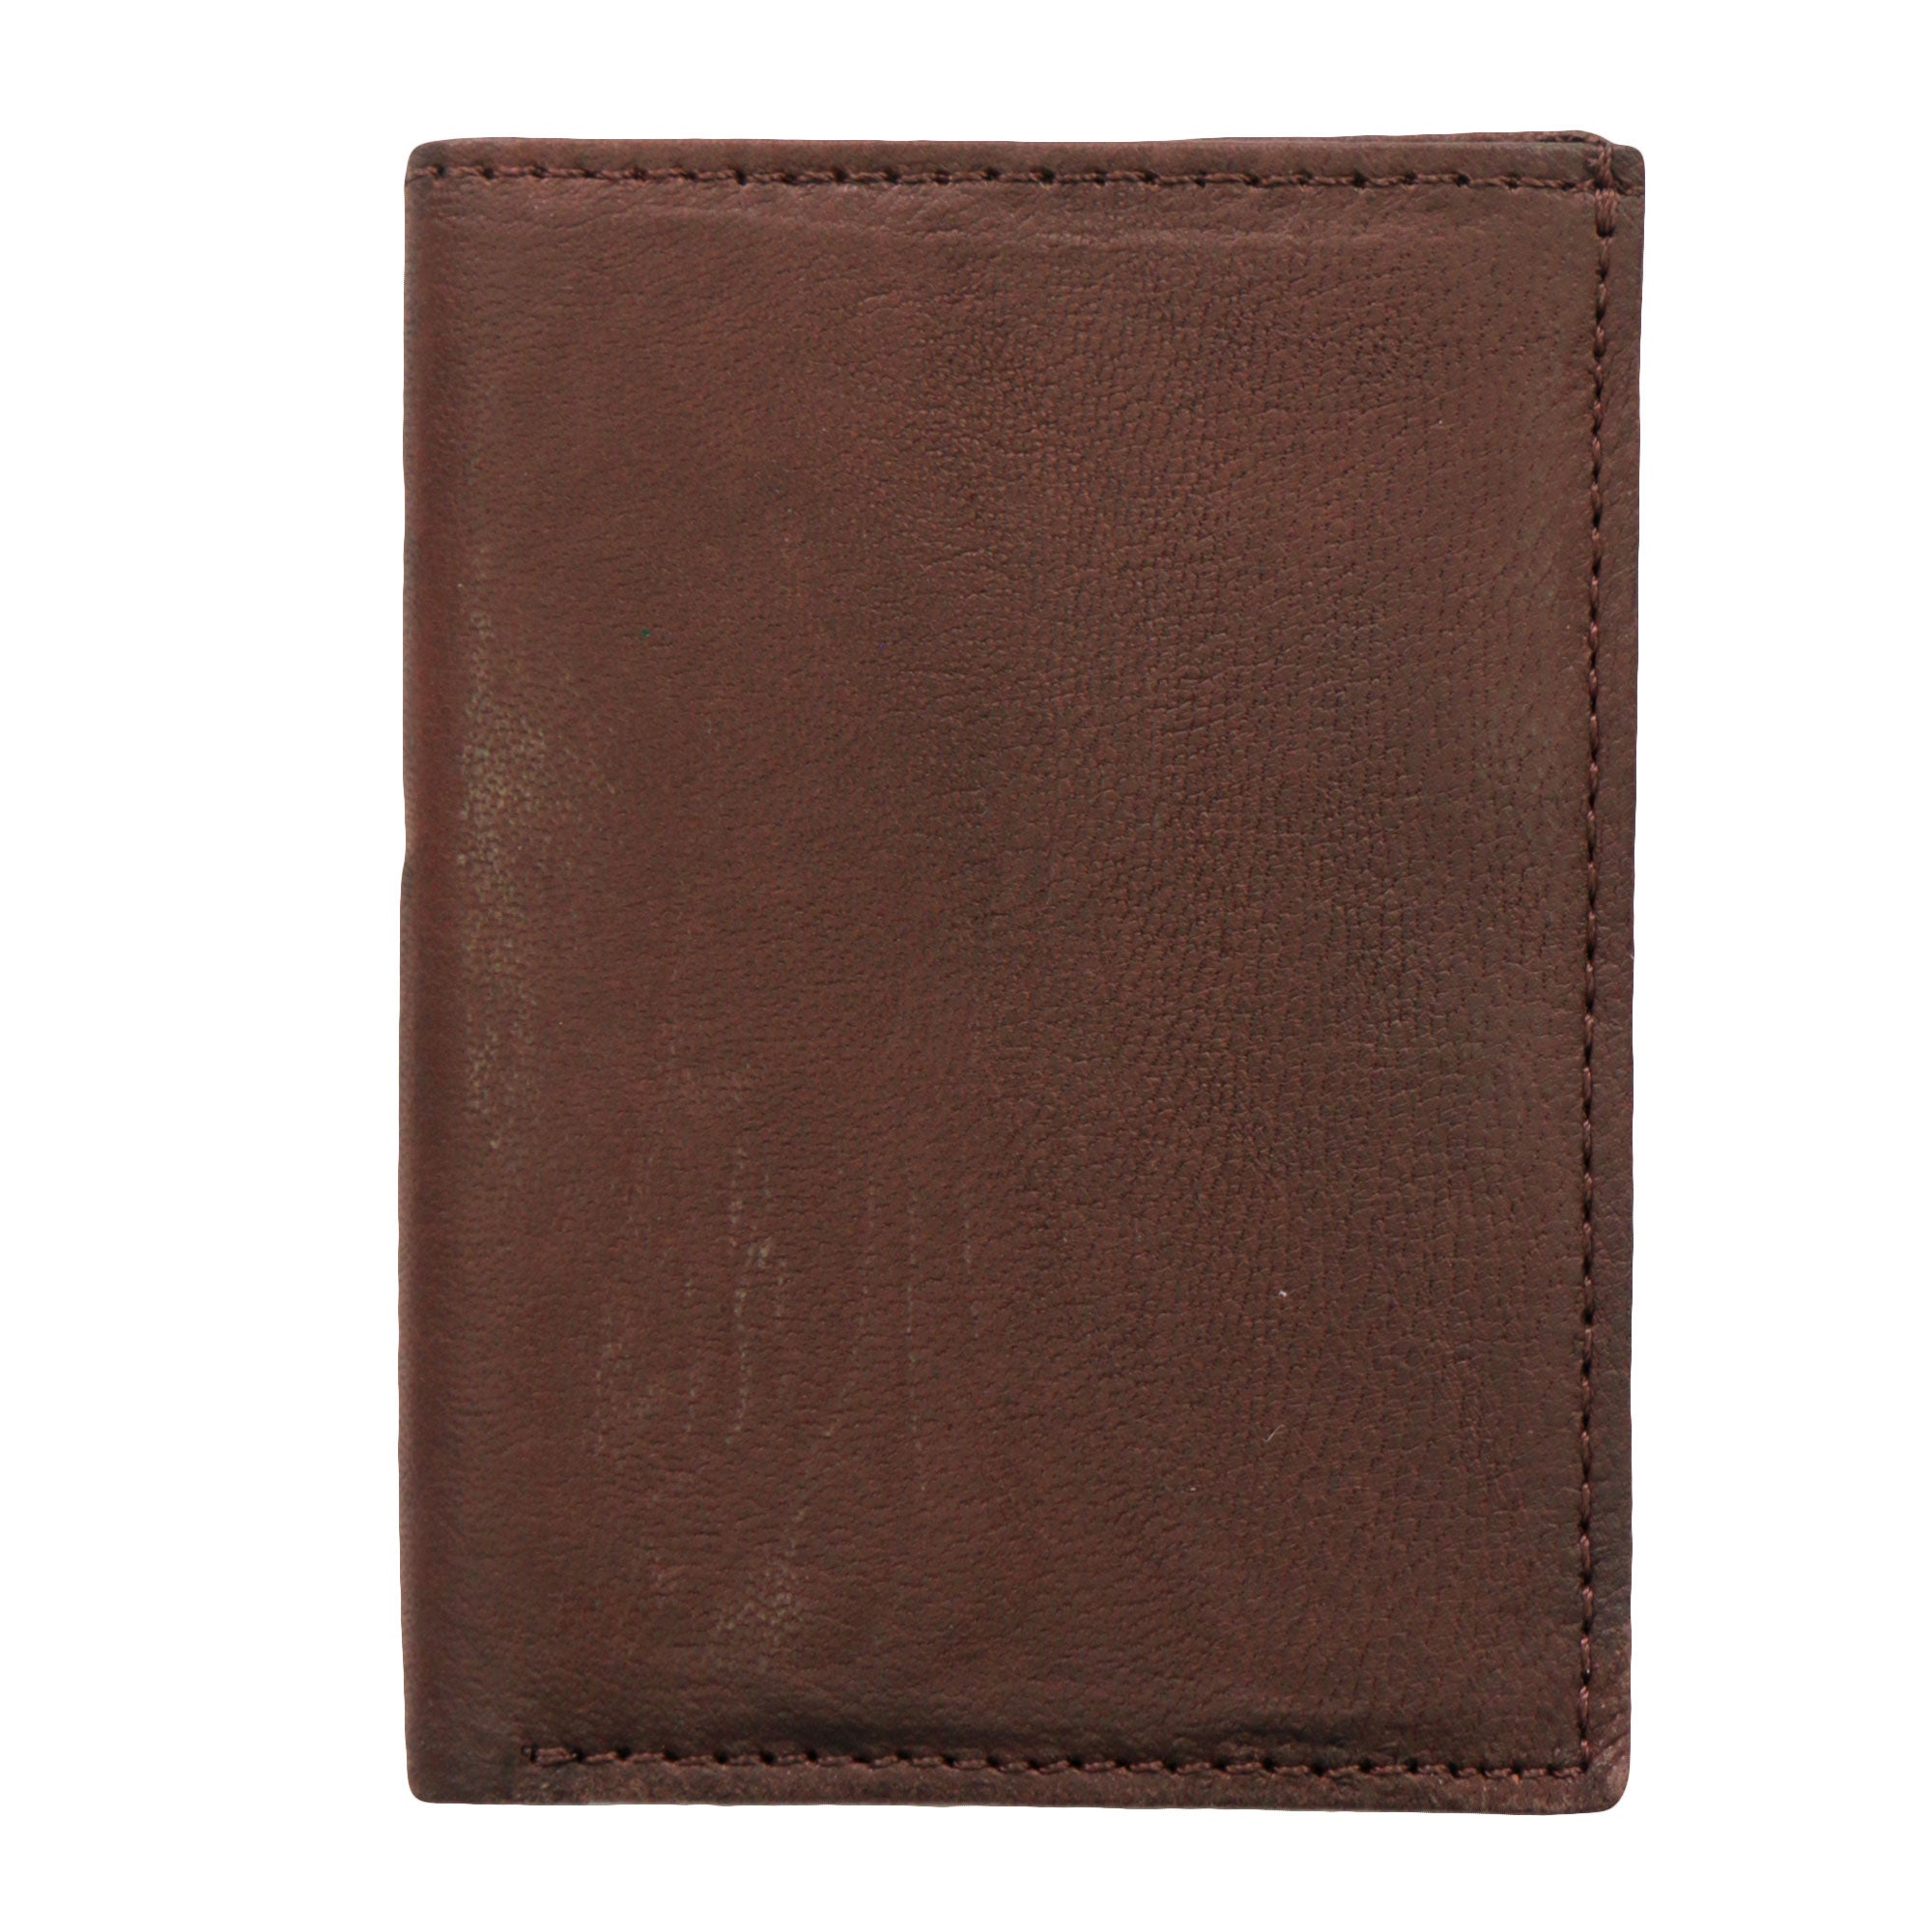 Hot Leathers Brown Credit Card Holding Wallet